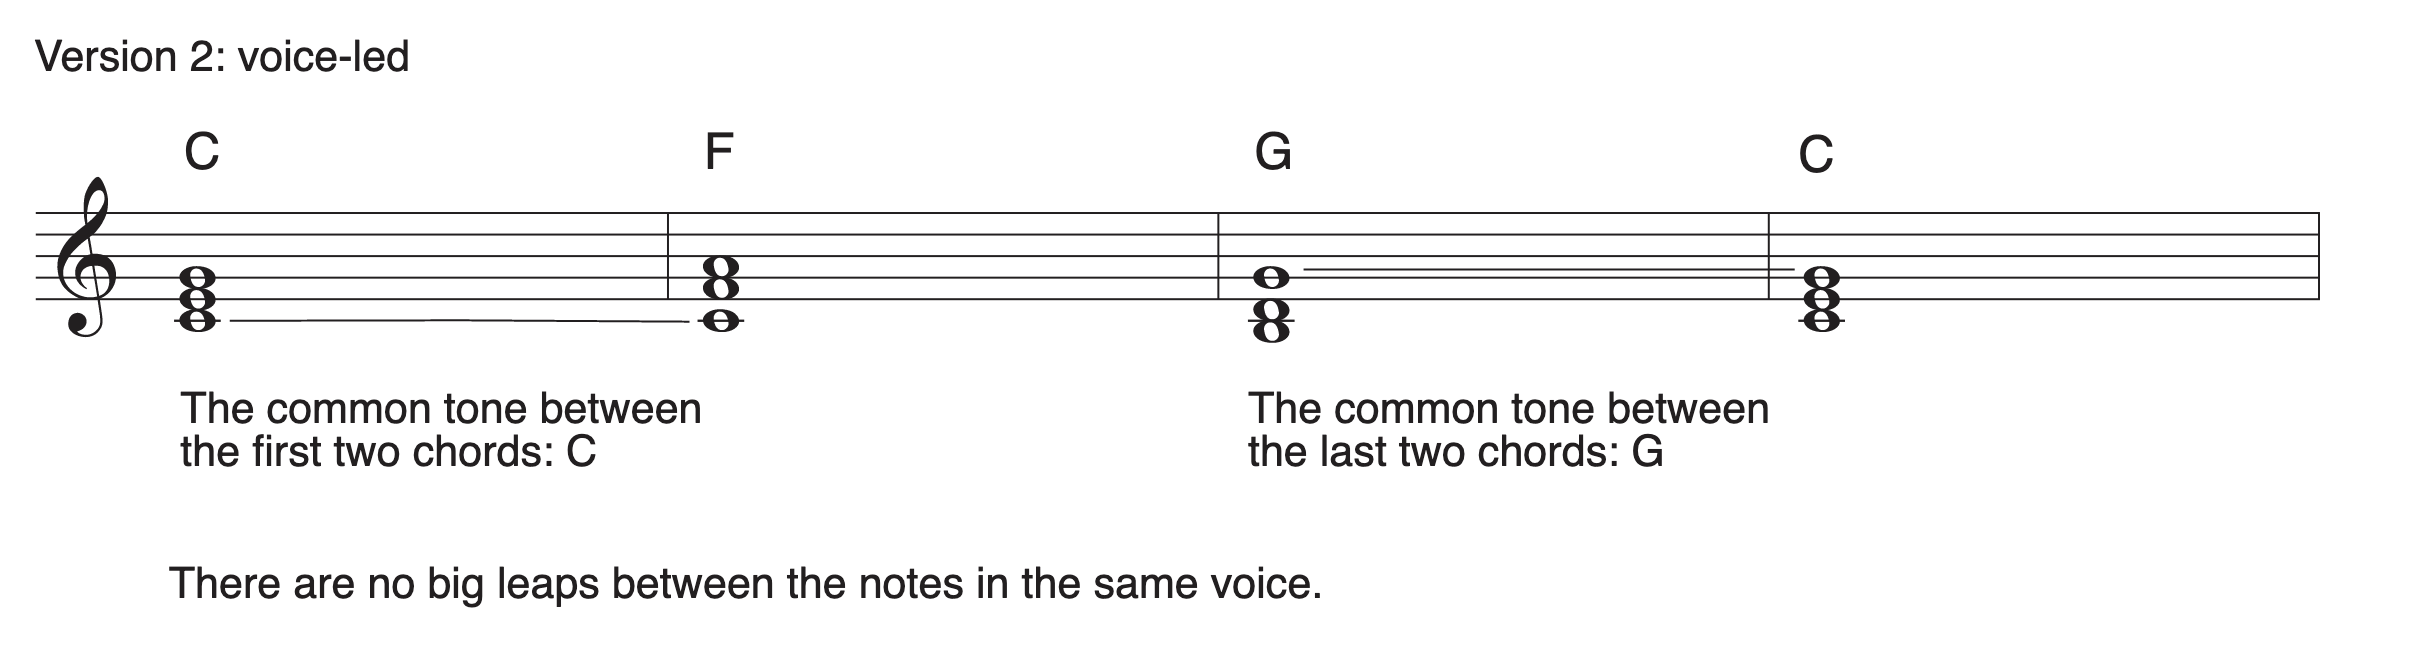 This music notation example shows a version of a chord progression that IS voice-led.